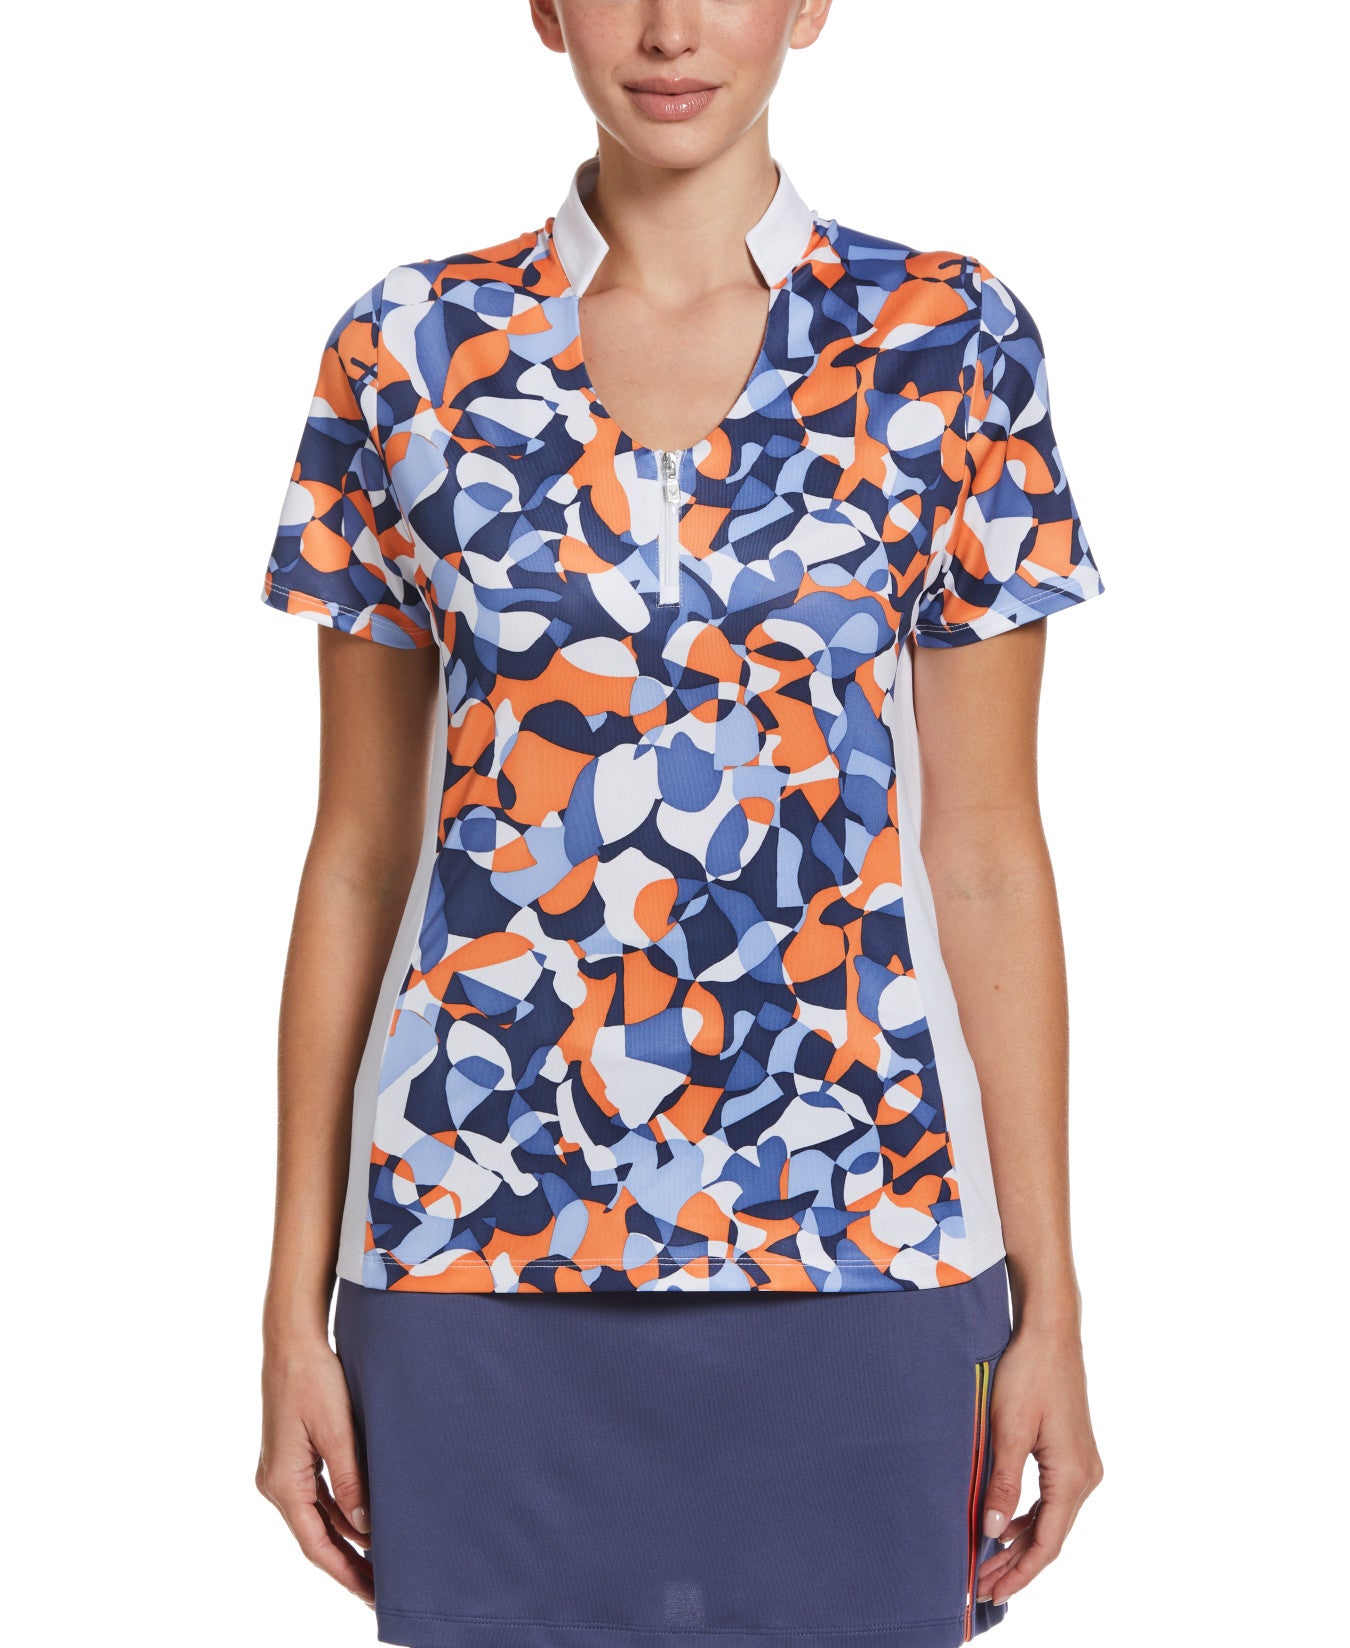 View Abstract Floral VNeck Womens Polo Top In Blue Indigo information